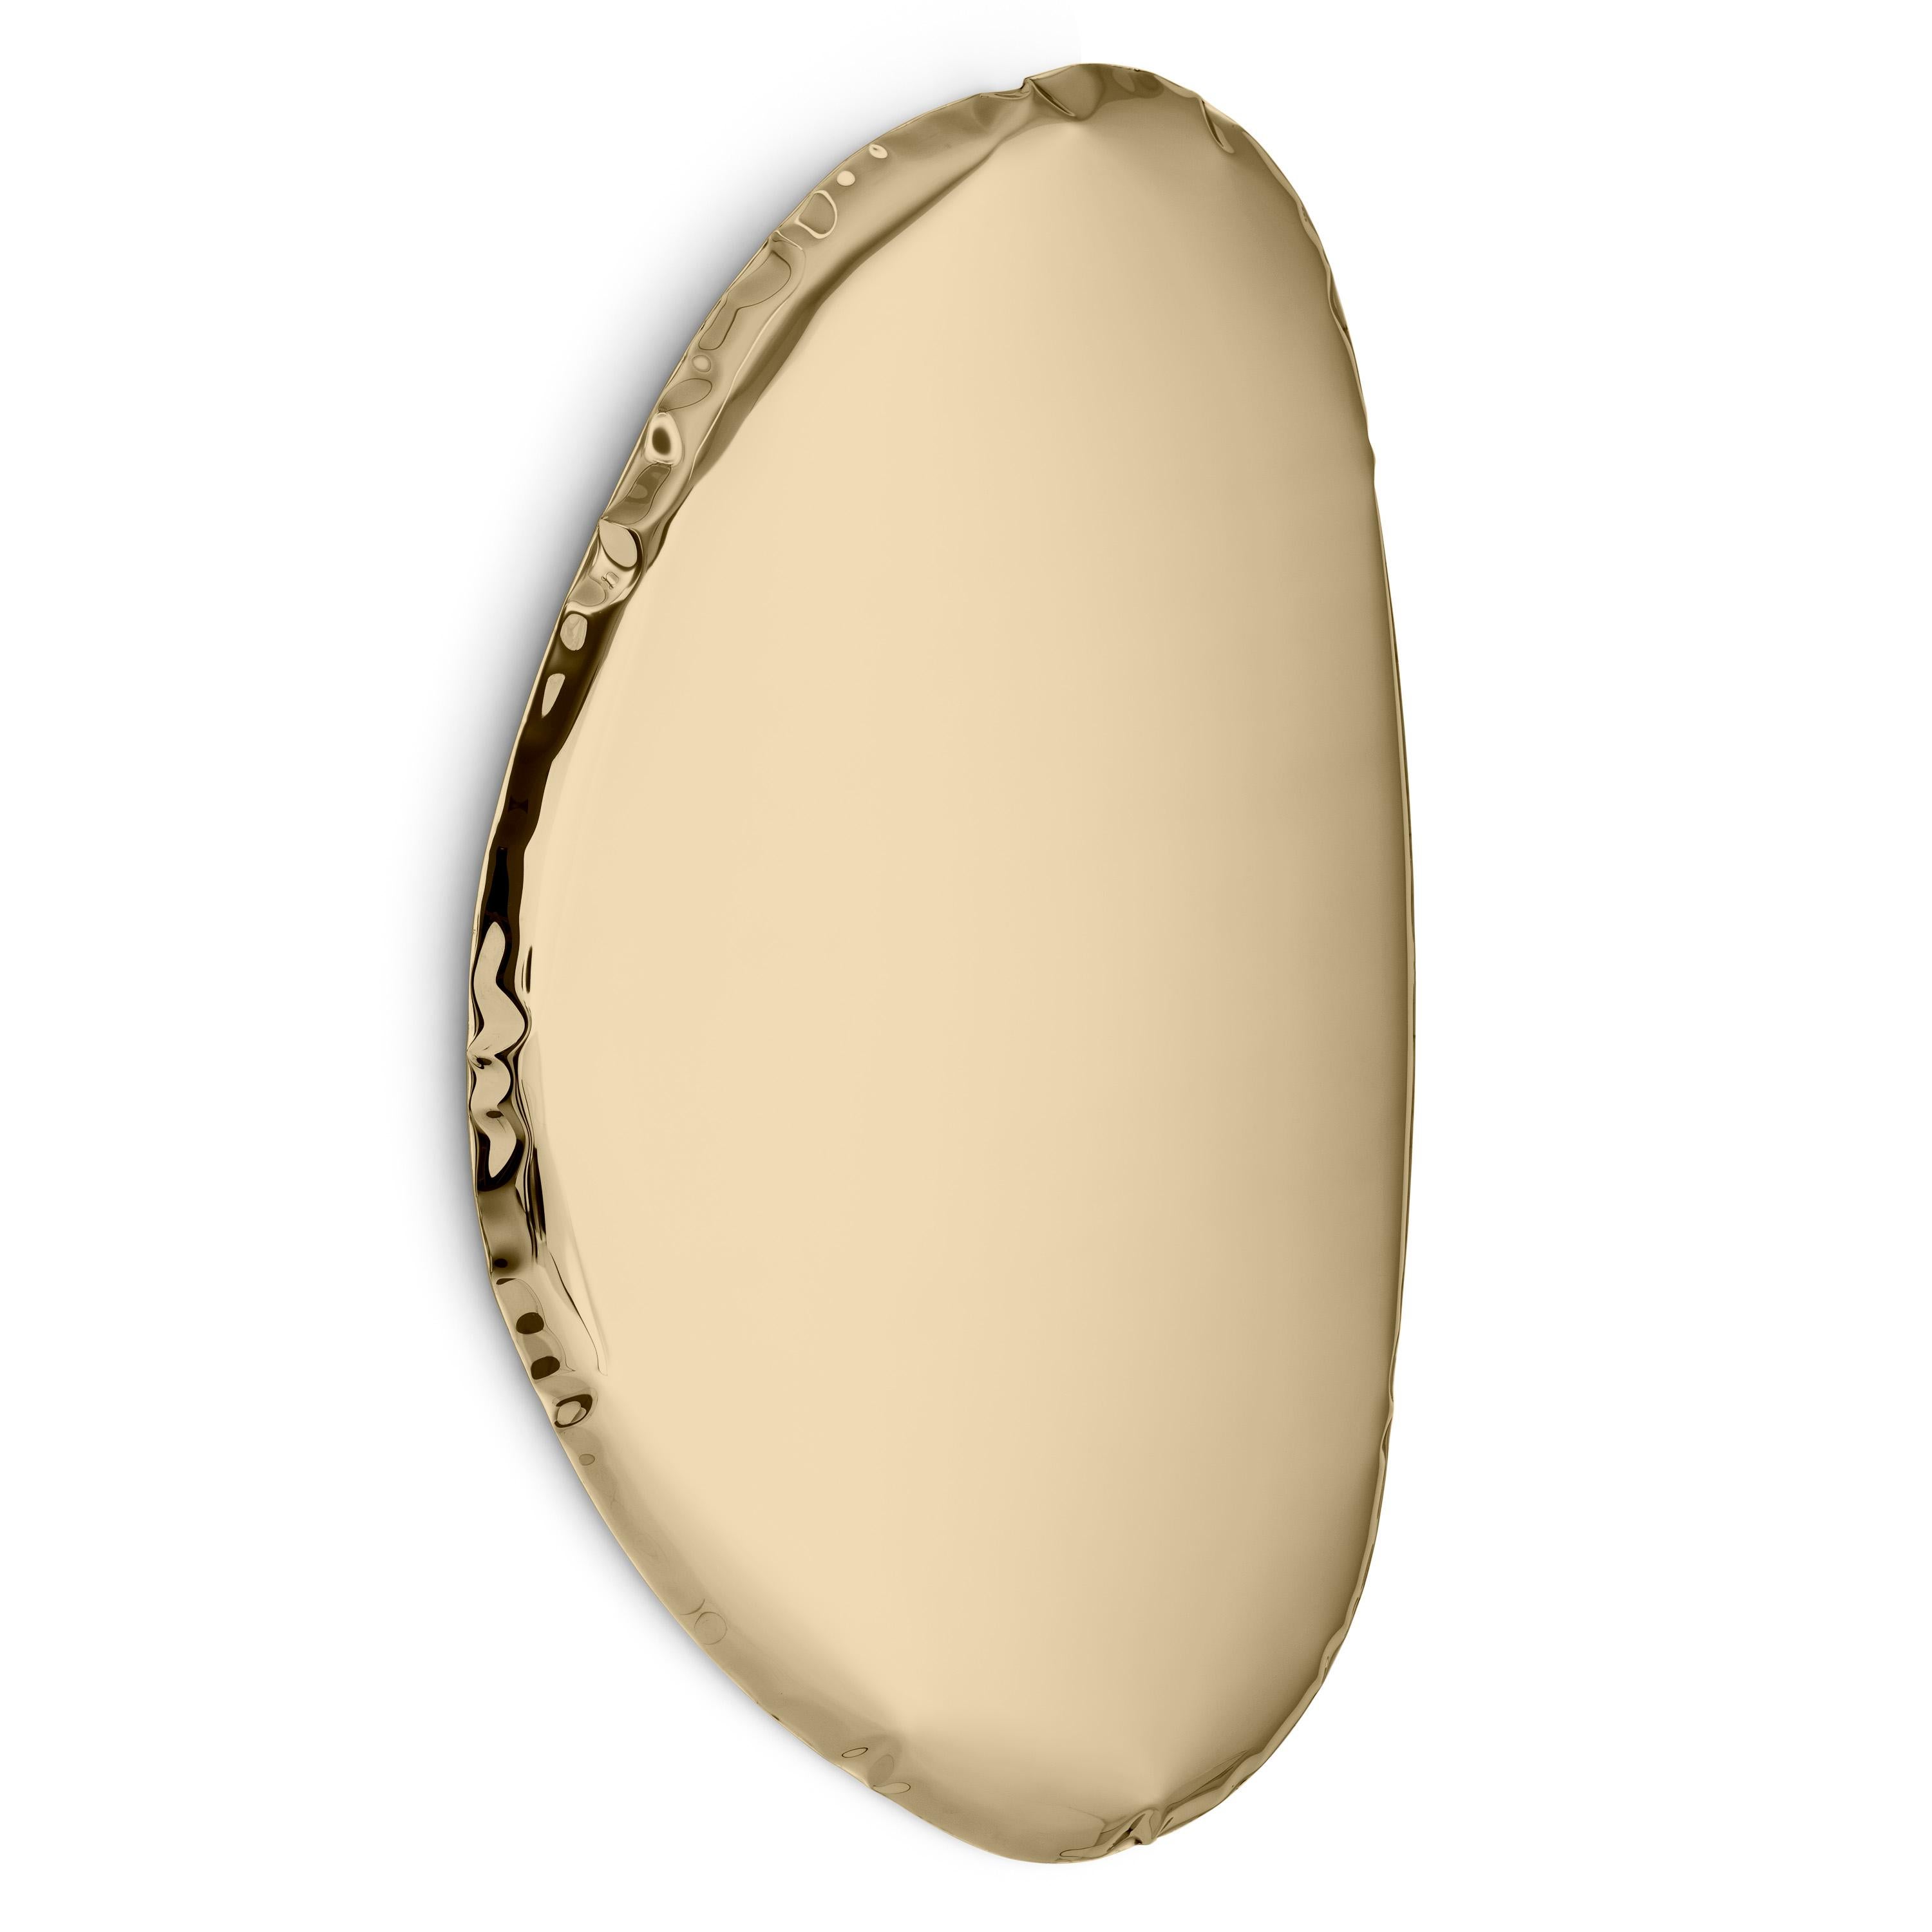 Contemporary Mirror 'Tafla O3', AURUM Collection, Rose Gold, by Zieta For Sale 1